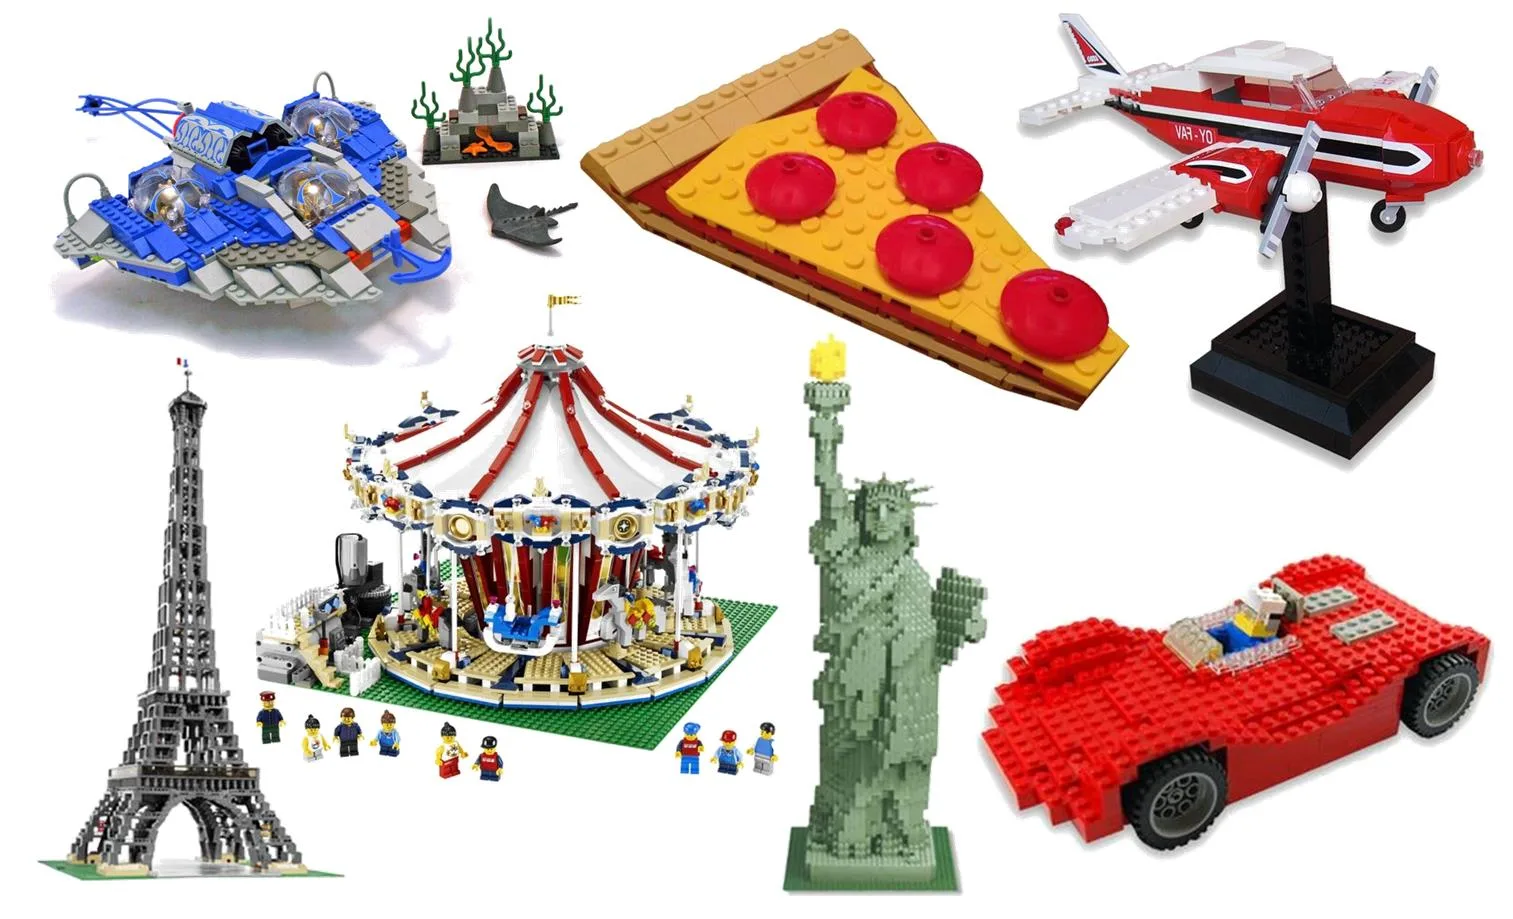 25 Rarest And Most Expensive Lego Sets - Fantasy Topics